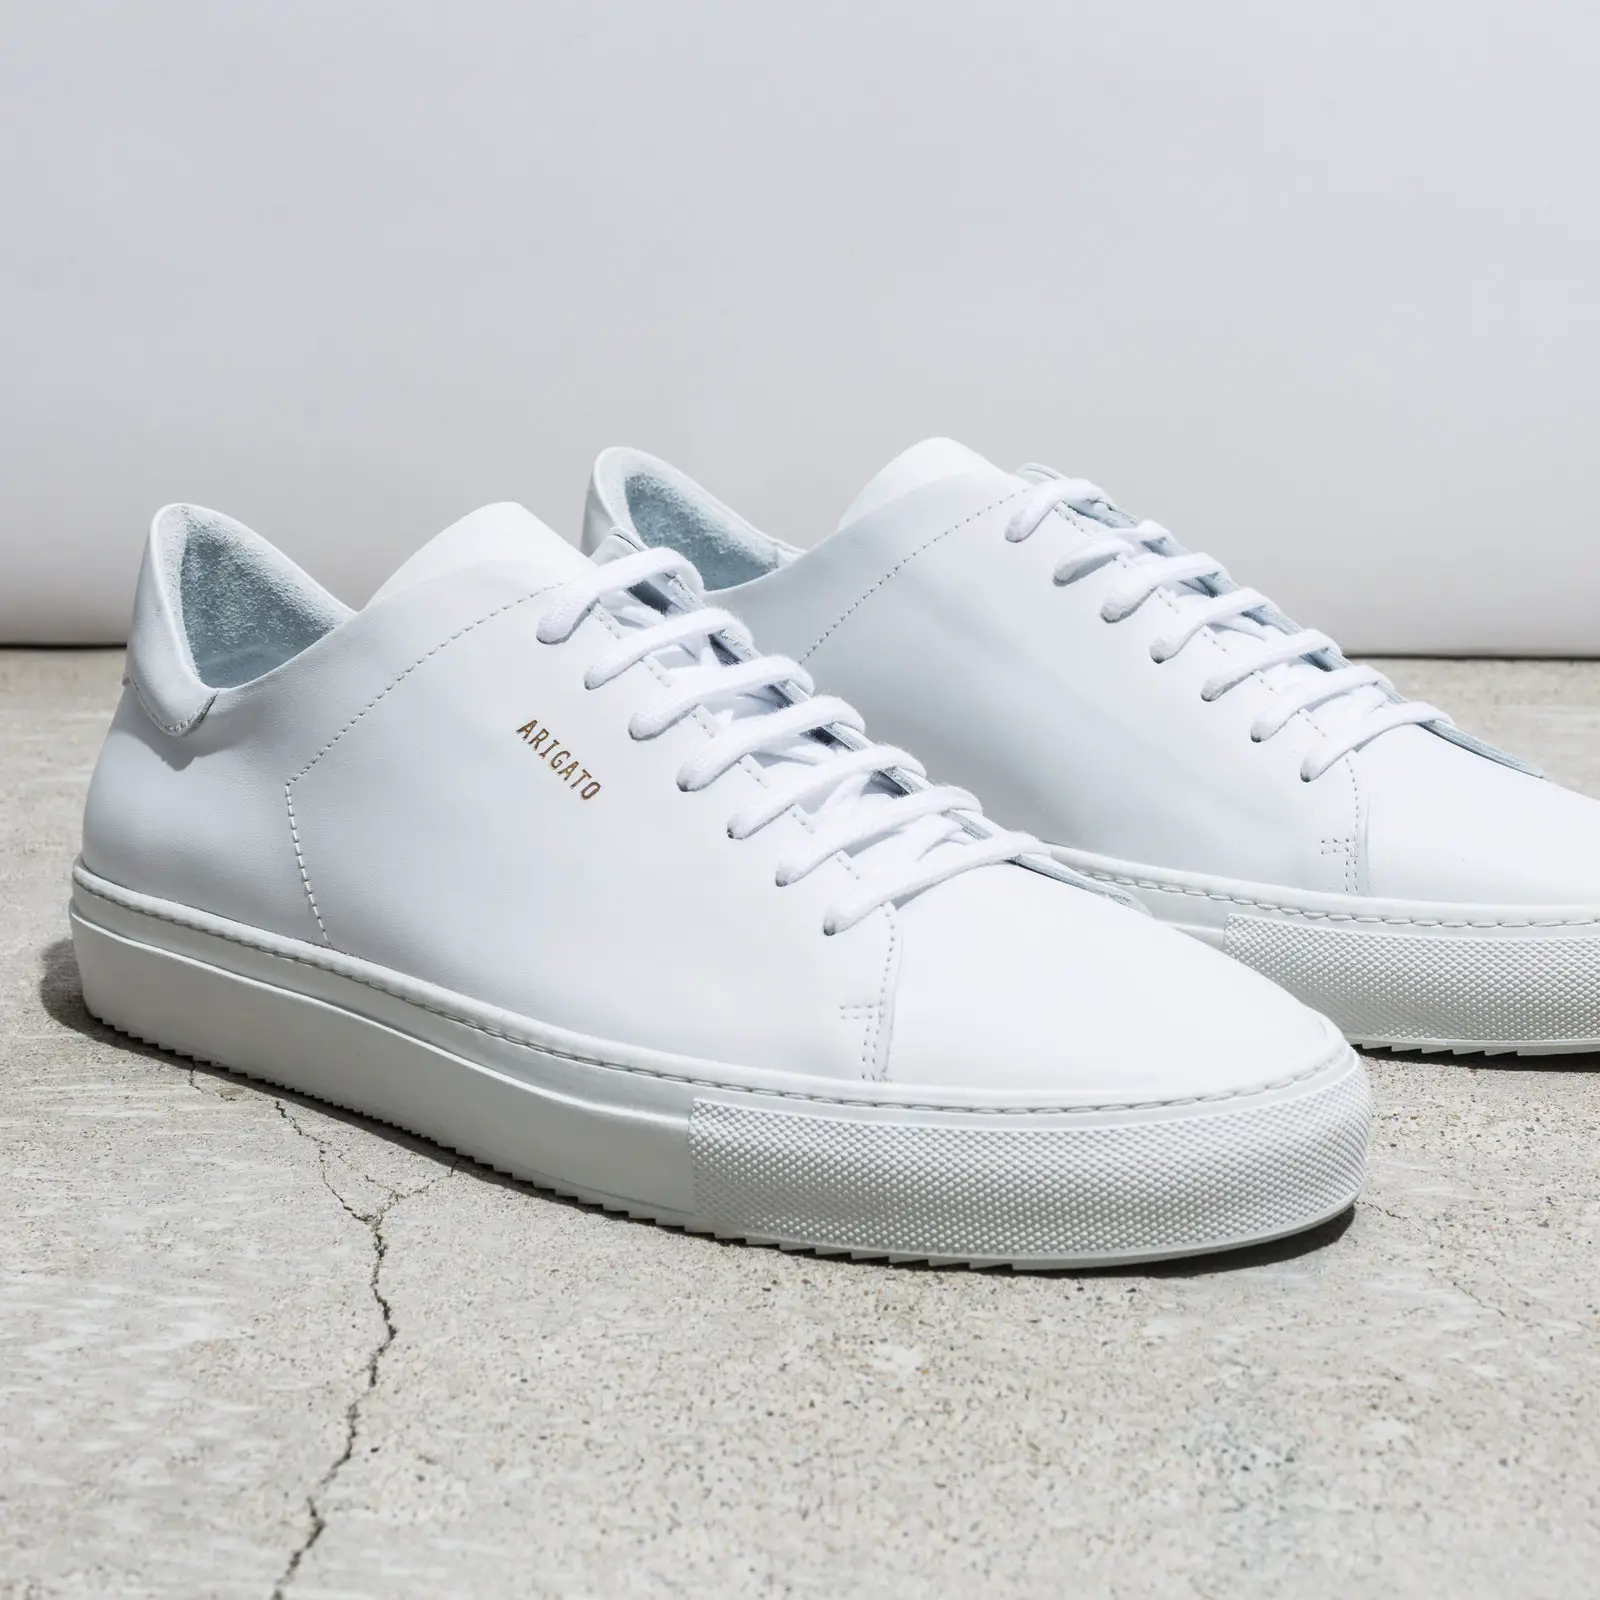 The Best White Sneakers for Men in 2020